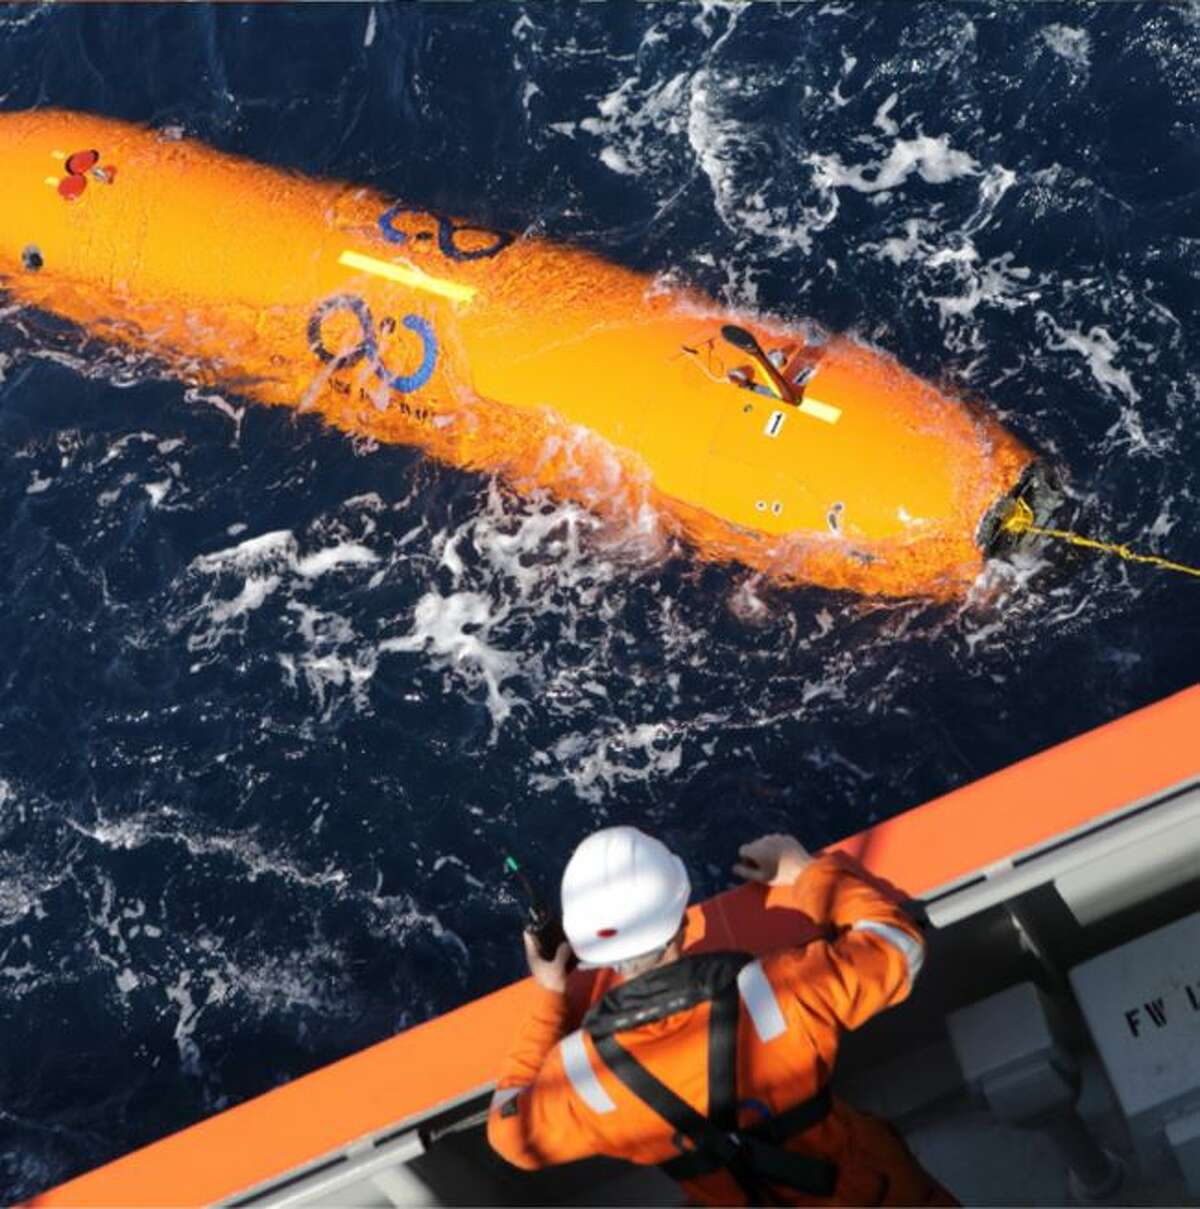 Ocean Infinity deploys one of its Autonomous Underwater Vehicles to search for the ARA San Juan, an Argentine submarine that went missing in November 2017.